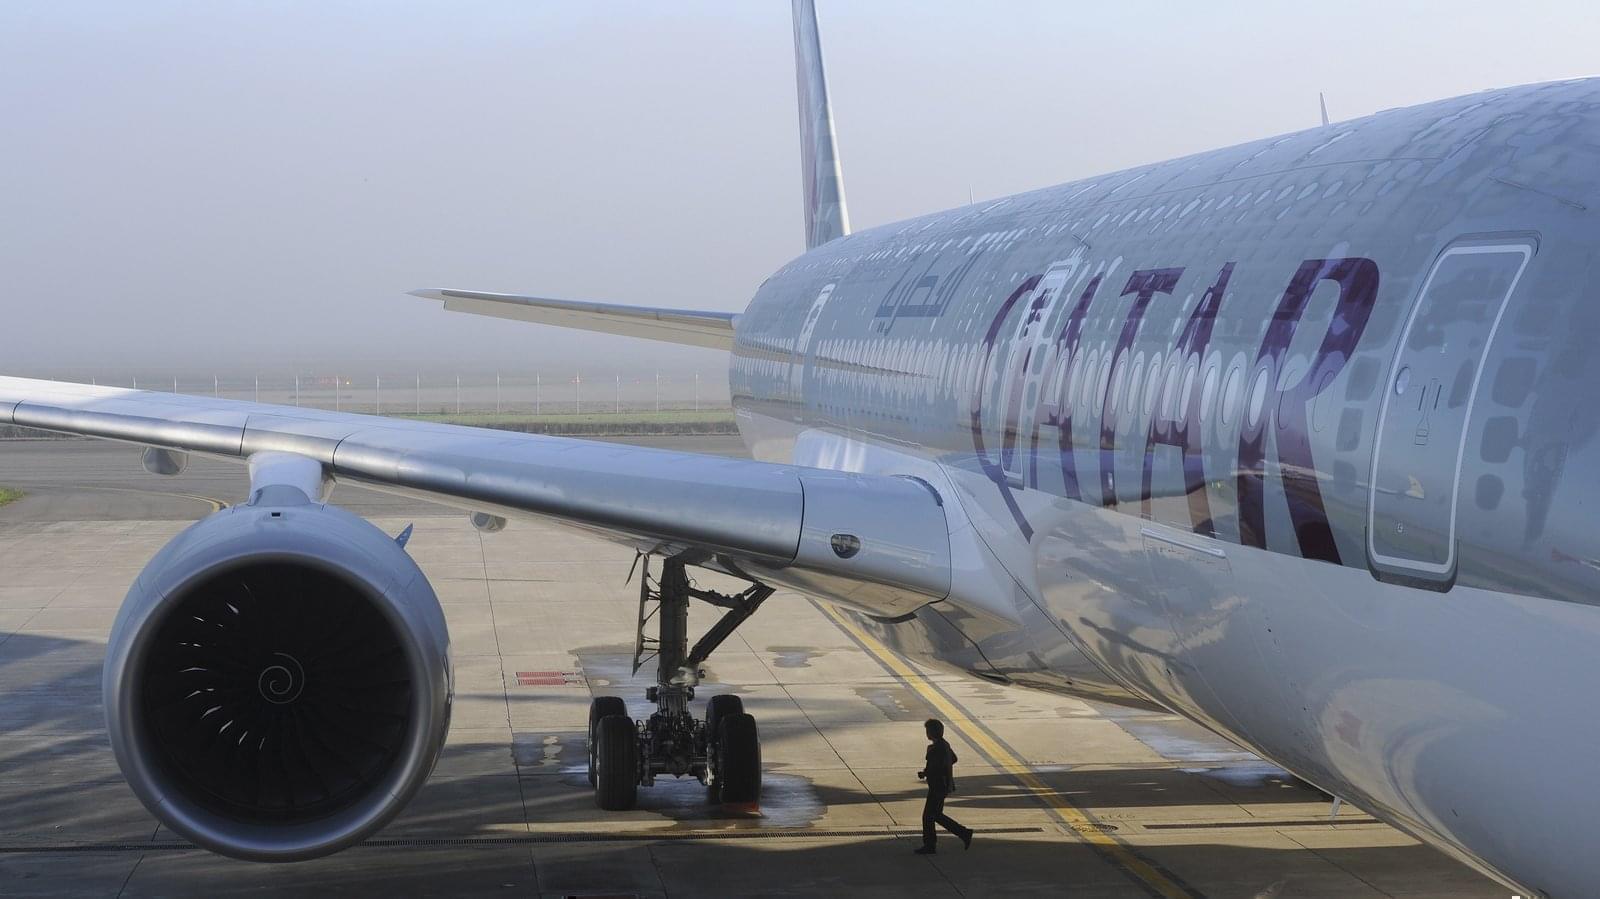 An Airbus A350-900 for Qatar Airways in 2014 in France. Qatar Airways is among the airlines that have announced they will resume boarding travelers affected by President Trump's executive order.